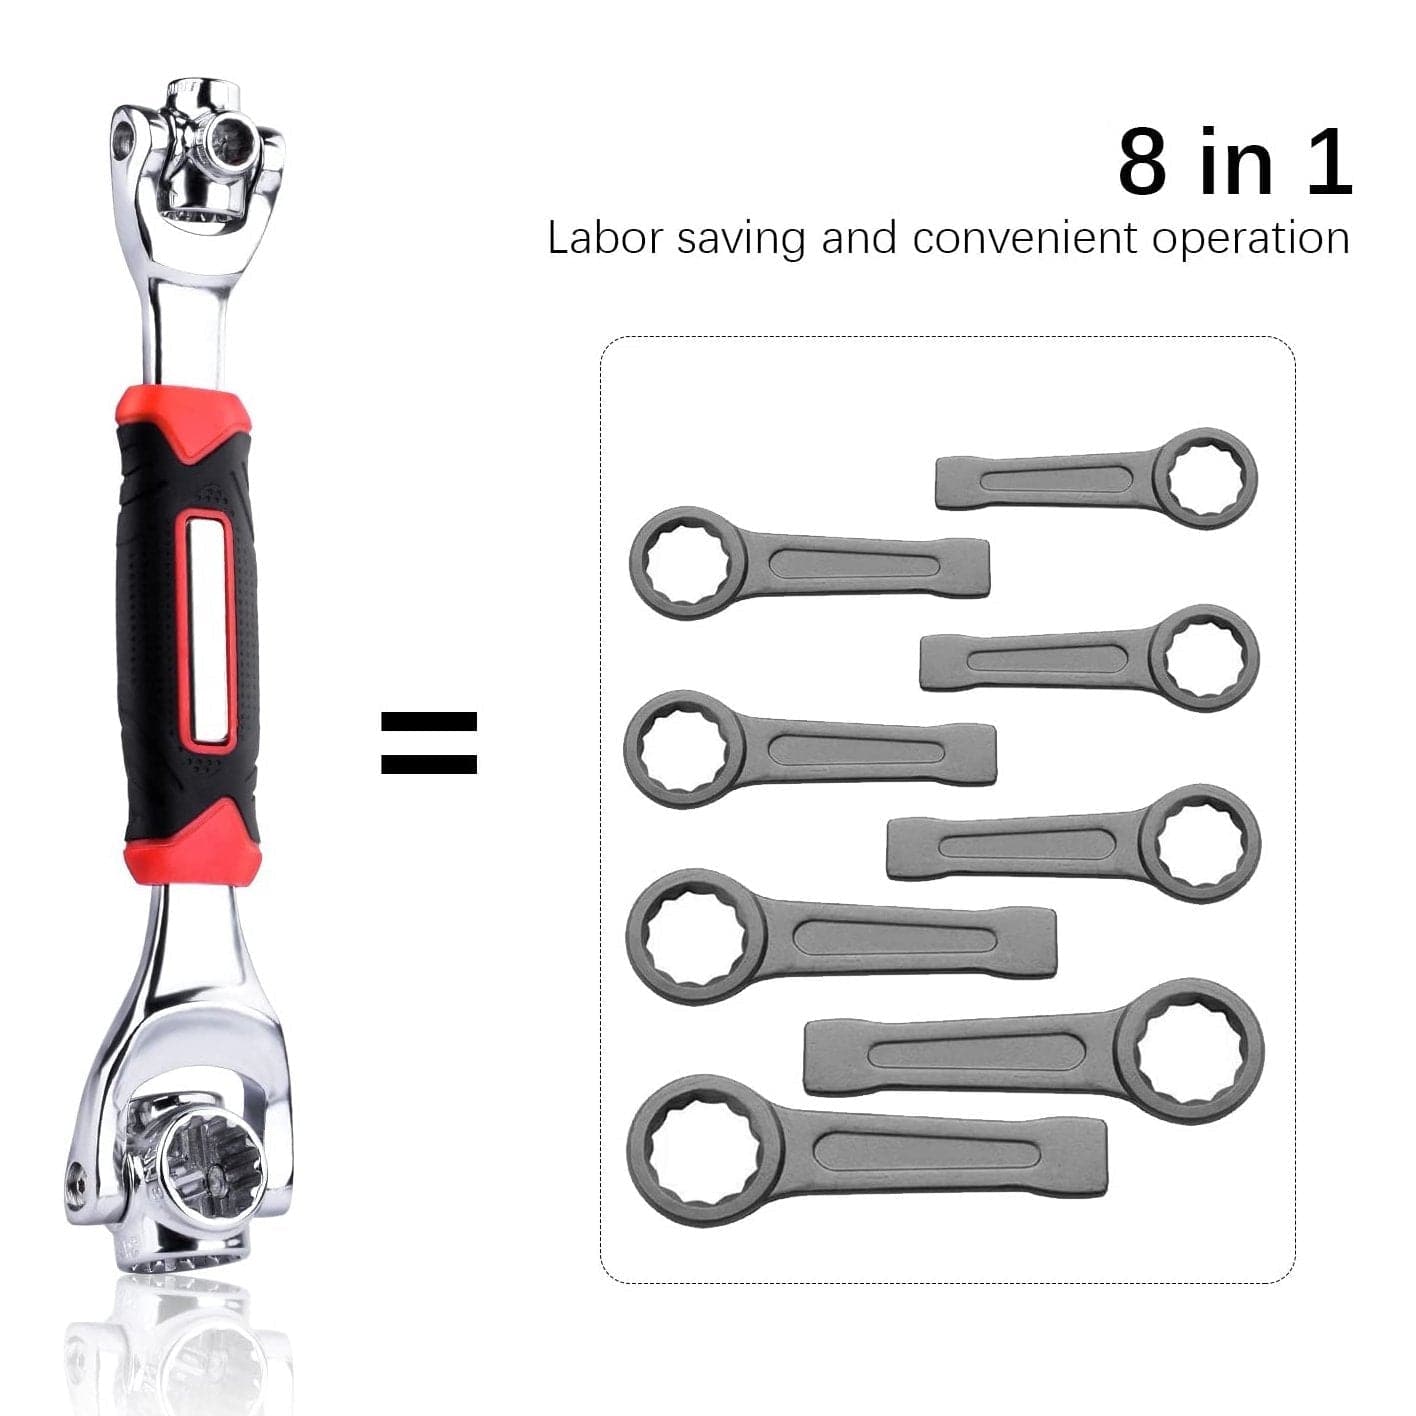 Multipurpose Wrench Tool Adjustable All in One Wrench 48 in 1 - Kyxial™ Kyxial™ Poshure®